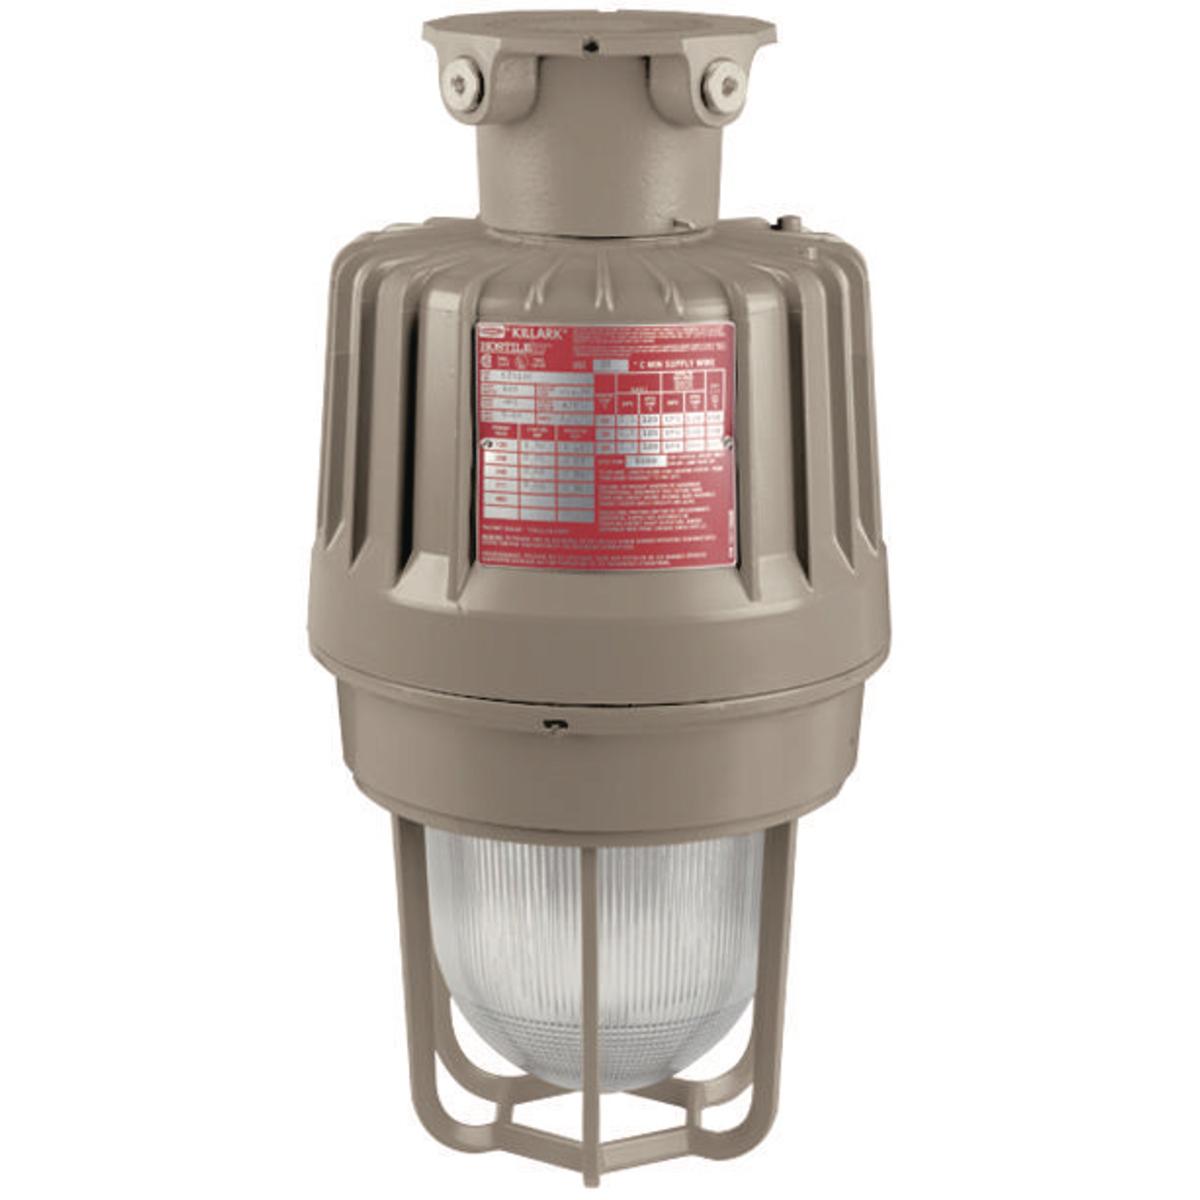 Hubbell EZP256X2G 250W 120/277/347V Pulse-Start Metal Halide Ceiling Mount with Guard  ; Three light sources – High Pressure Sodium (50-400W), Metal Halide (70-400W) and Pulse Start Metal Halide (175-400W) ; Mounting choice –Pendant, ceiling, 25˚ stanchion or 90˚ wall moun